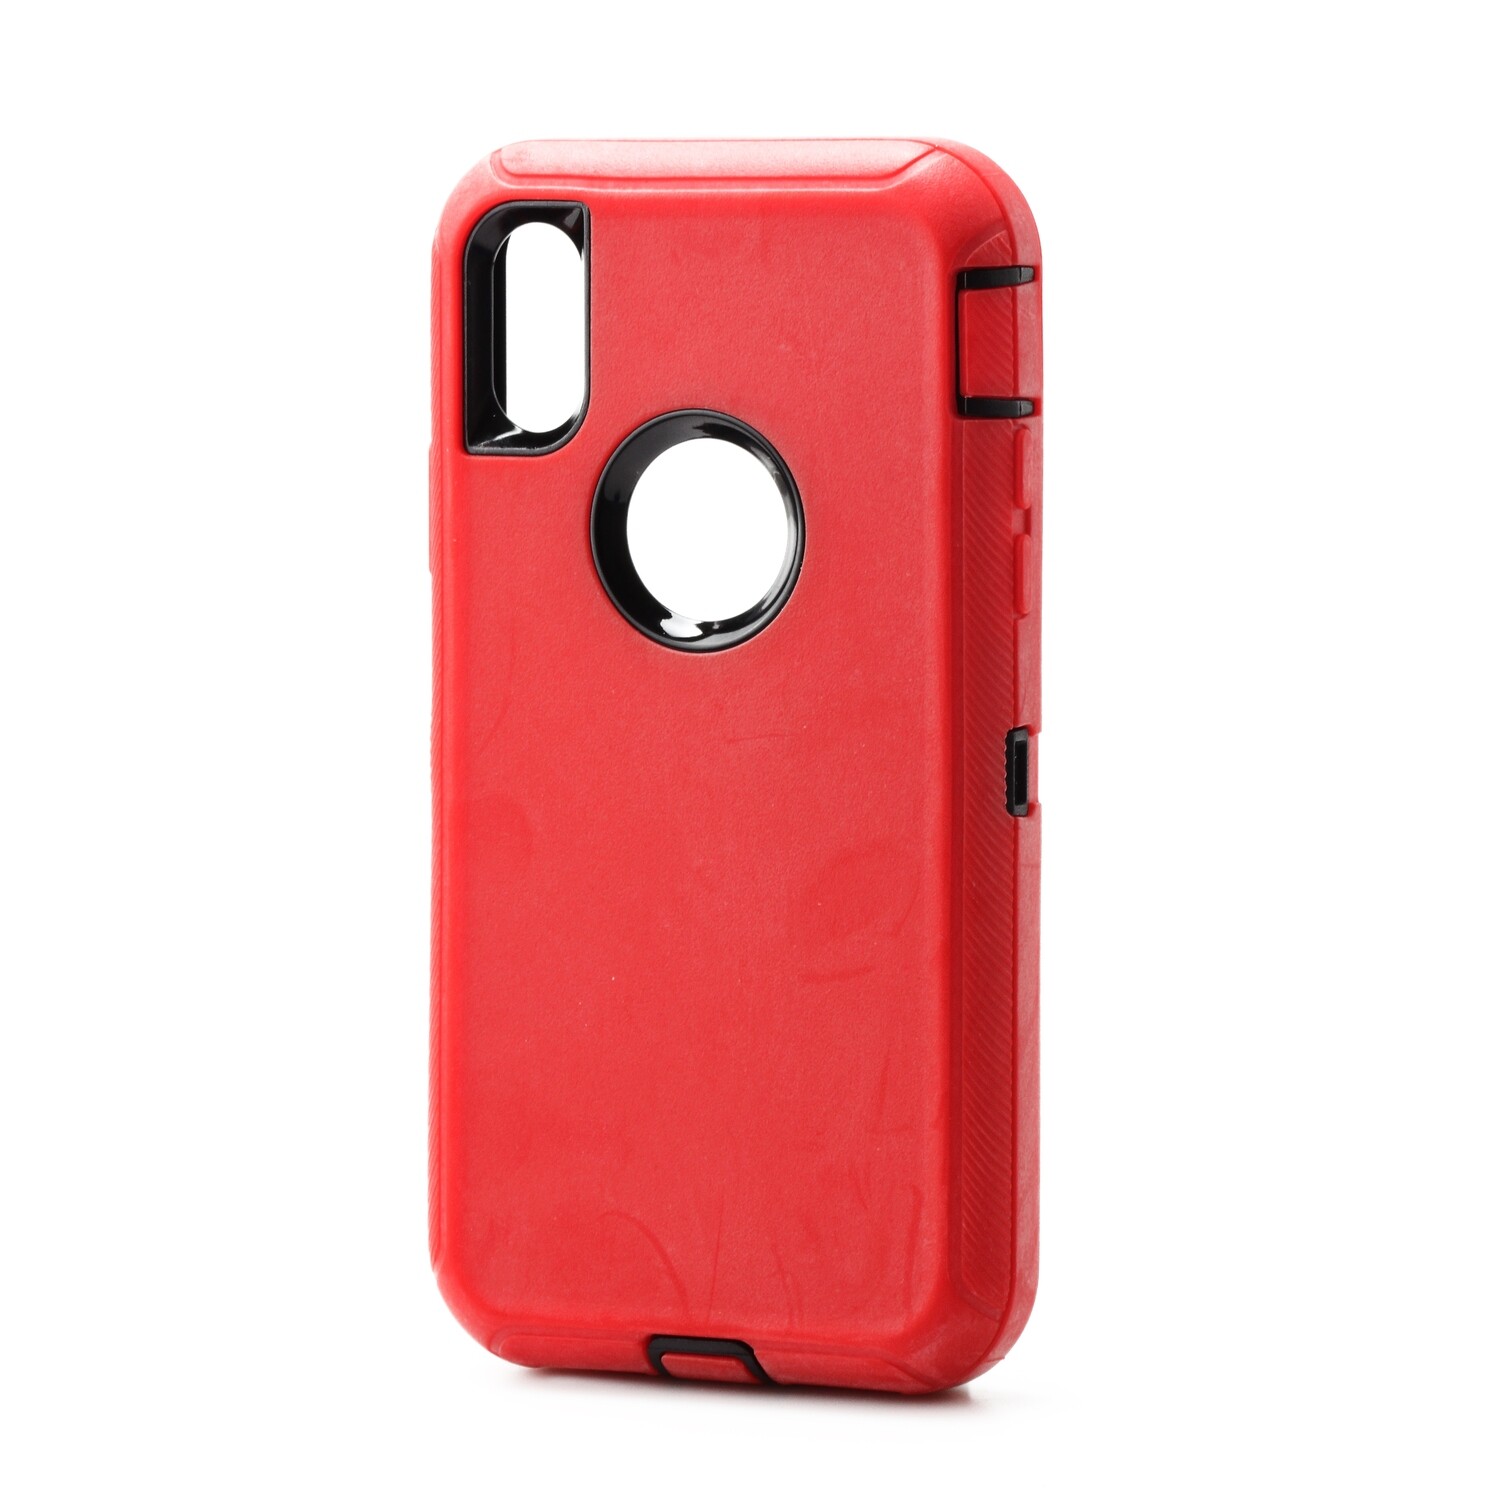 iPhone XR 6.1 Tough Guardian Robot ShockProof Case, Color: Red